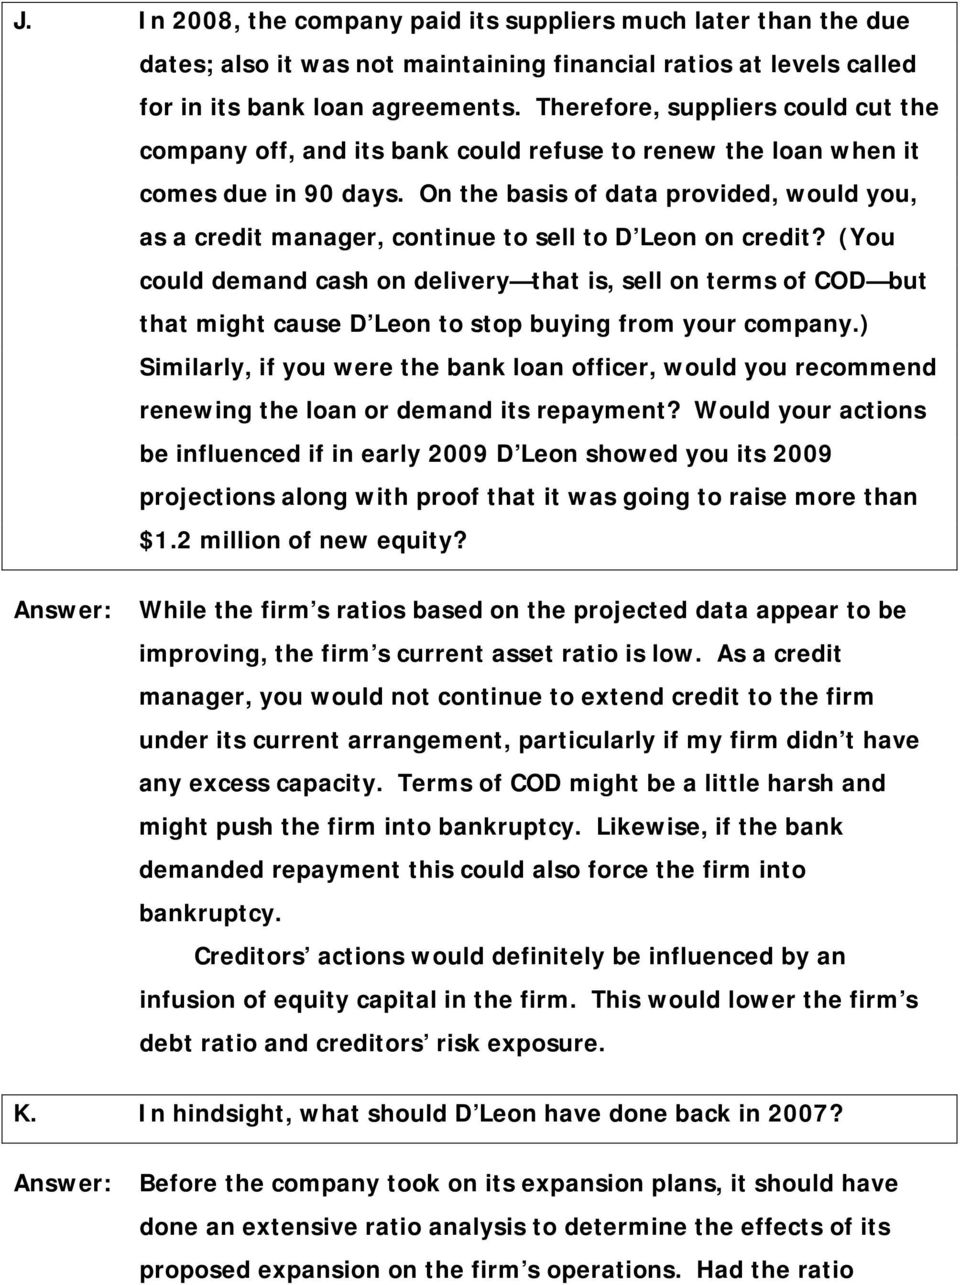 On the basis of data provided, would you, as a credit manager, continue to sell to D Leon on credit?